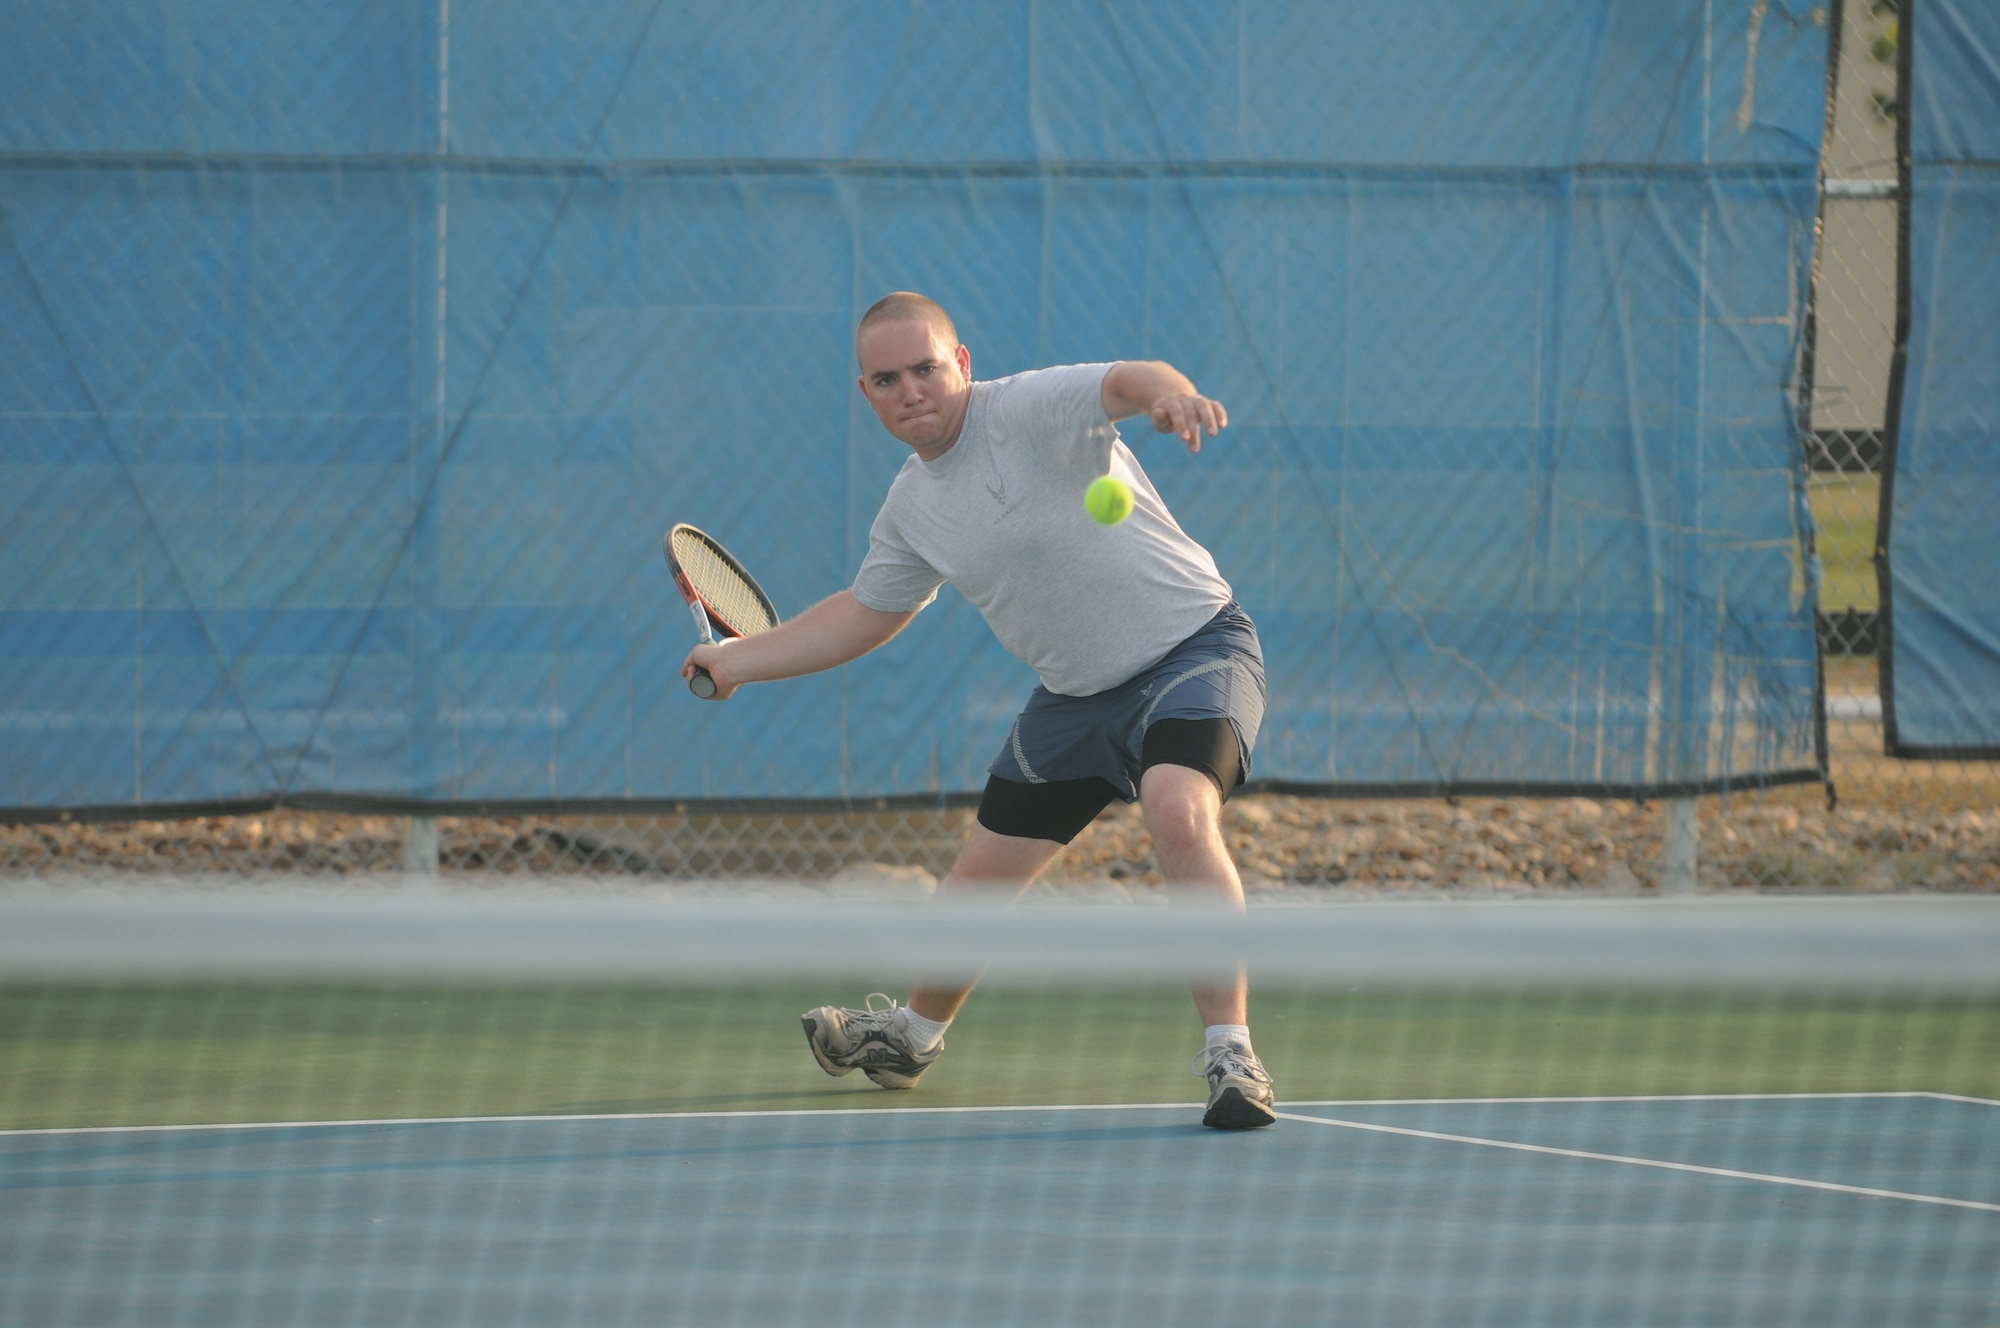 GOODFELLOW AIR FORCE BASE, Texas - Senior Airman John Yarbrough, 17th Communications Squadron, plays in a tennis tournament May 27. Team Goodfellow devoted the day to safety and sports to kick off the 101 critical days of summer. (U.S. Air Force photo/Staff Sgt. Heather L Rodgers)